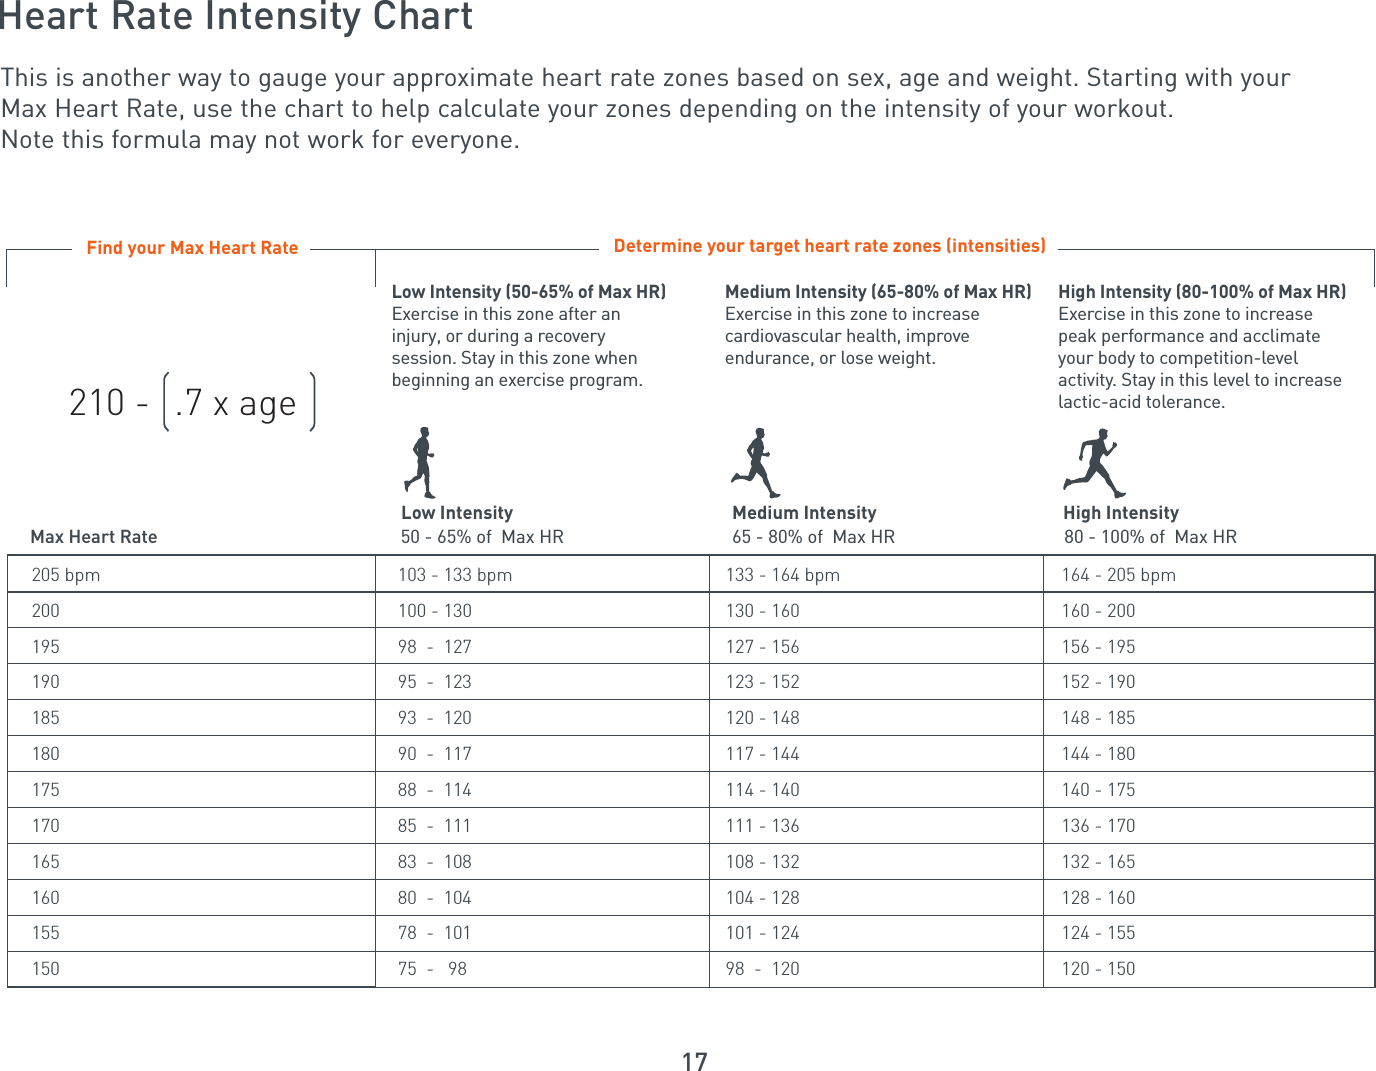 17Heart Rate Intensity ChartThis is another way to gauge your approximate heart rate zones based on sex, age and weight. Starting with your Max Heart Rate, use the chart to help calculate your zones depending on the intensity of your workout. Note this formula may not work for everyone.Determine your target heart rate zones (intensities)Low Intensity Medium Intensity High IntensityMax Heart Rate 50 - 65% of  Max HR 65 - 80% of  Max HR 80 - 100% of  Max HR205 bpm 103 - 133 bpm 133 - 164 bpm  164 - 205 bpm200 100 - 130 130 - 160 160 - 200195 98  -  127 127 - 156 156 - 195190 95  -  123 123 - 152 152 - 190185 93  -  120 120 - 148 148 - 185180 90  -  117 117 - 144 144 - 180175 88  -  114 114 - 140 140 - 175170 85  -  111 111 - 136 136 - 170165 83  -  108 108 - 132 132 - 165160 80  -  104 104 - 128 128 - 160155 78  -  101 101 - 124 124 - 155150 75  -   98 98  -  120 120 - 150Low Intensity (50-65% of Max HR)Exercise in this zone after an injury, or during a recovery session. Stay in this zone when beginning an exercise program.Medium Intensity (65-80% of Max HR)Exercise in this zone to increase cardiovascular health, improve endurance, or lose weight.High Intensity (80-100% of Max HR)Exercise in this zone to increase peak performance and acclimate your body to competition-level activity. Stay in this level to increase lactic-acid tolerance.Find your Max Heart Rate210 -  .7 x age